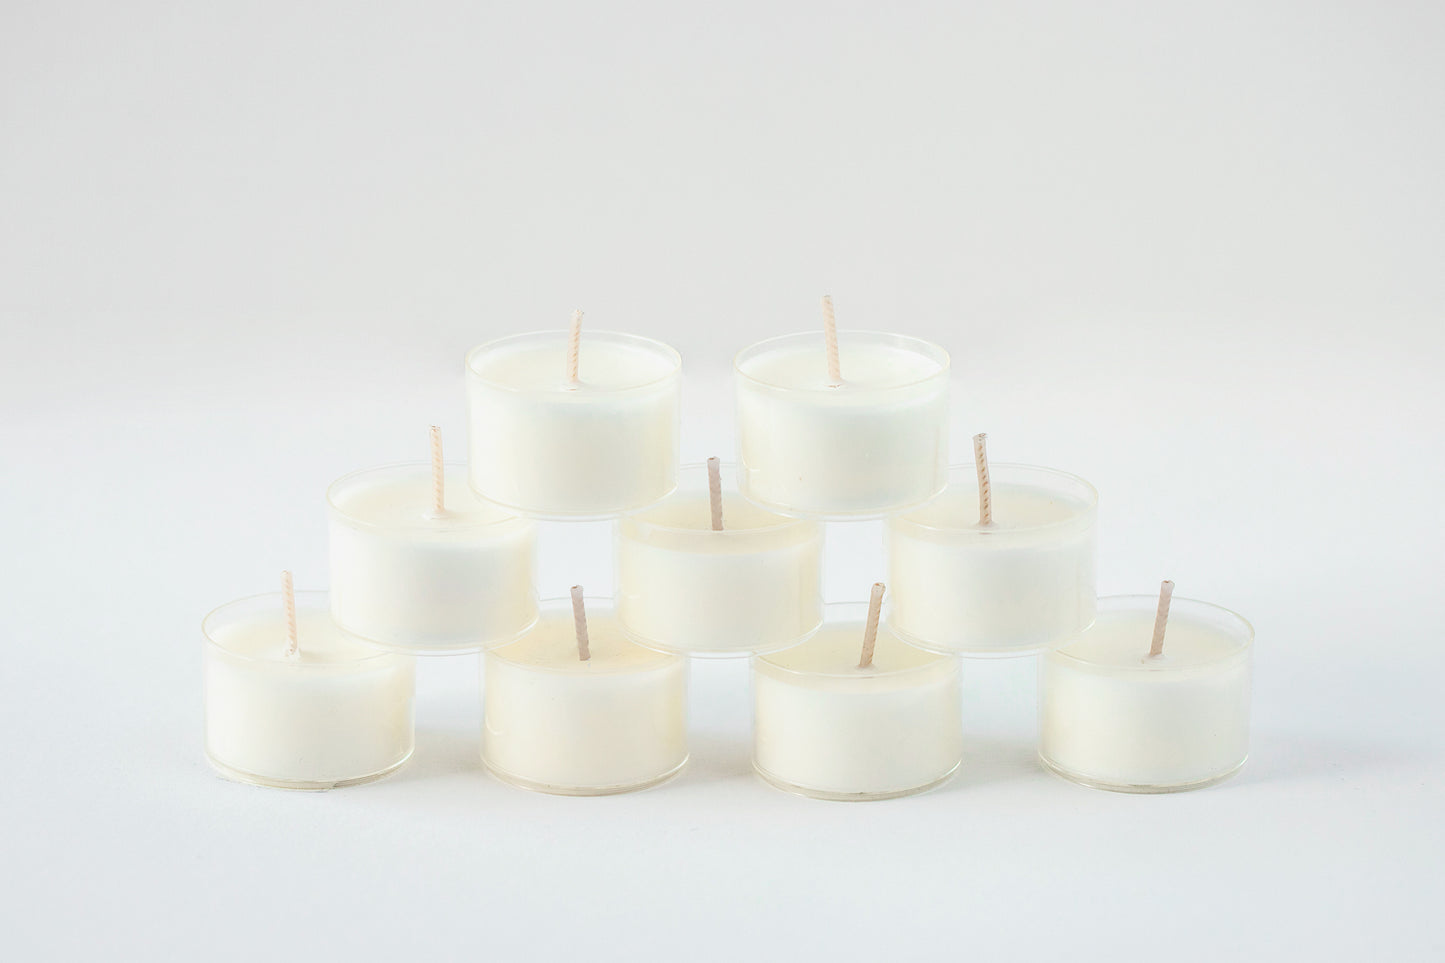 Candle Fragrances Sample Pack - Tea Candle Set of 9 - Scented Coconut Wax Tea Candles